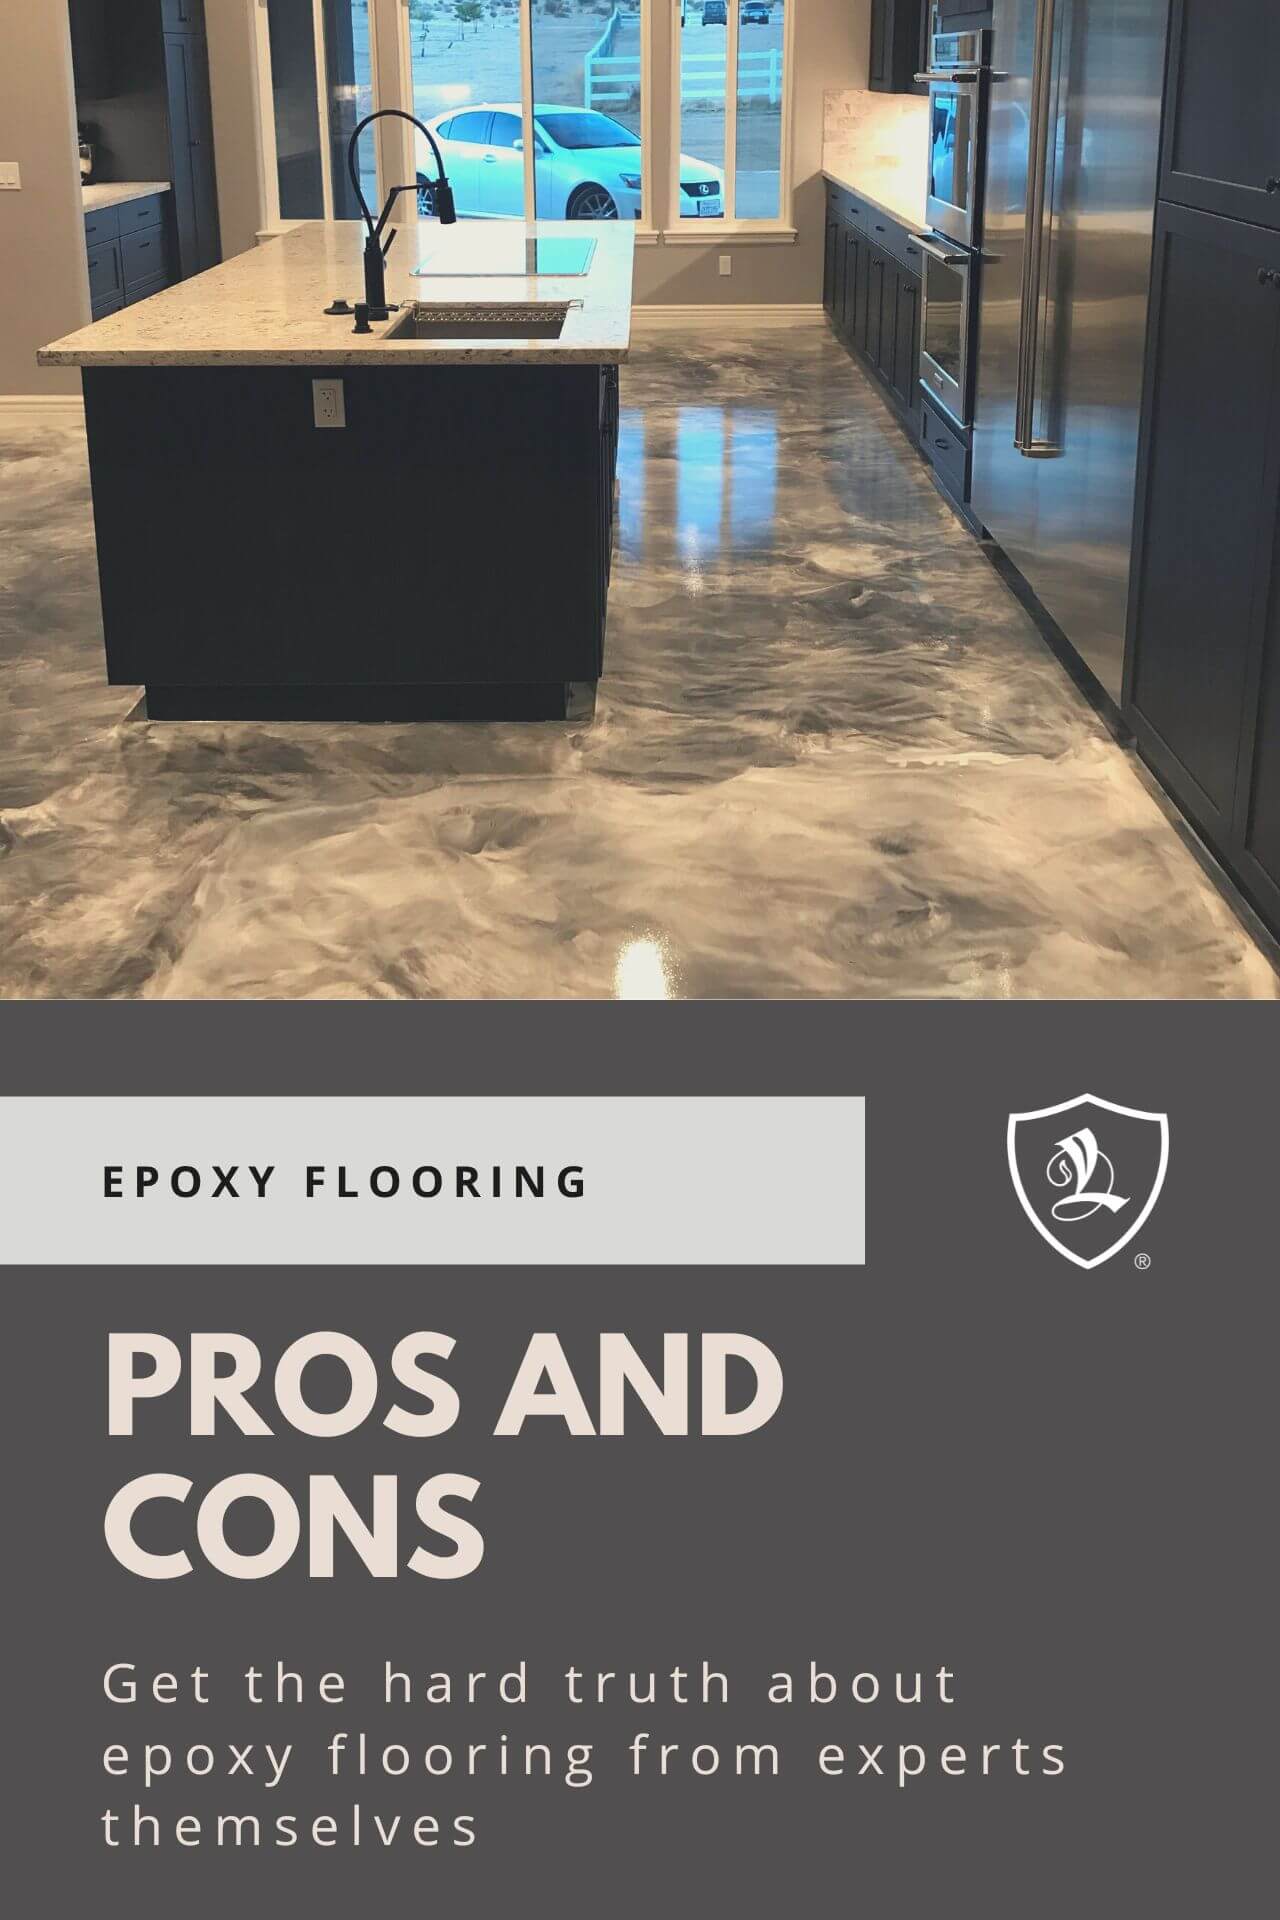 Epoxy Flooring Pros and Cons - Get the hard truth from our experts.